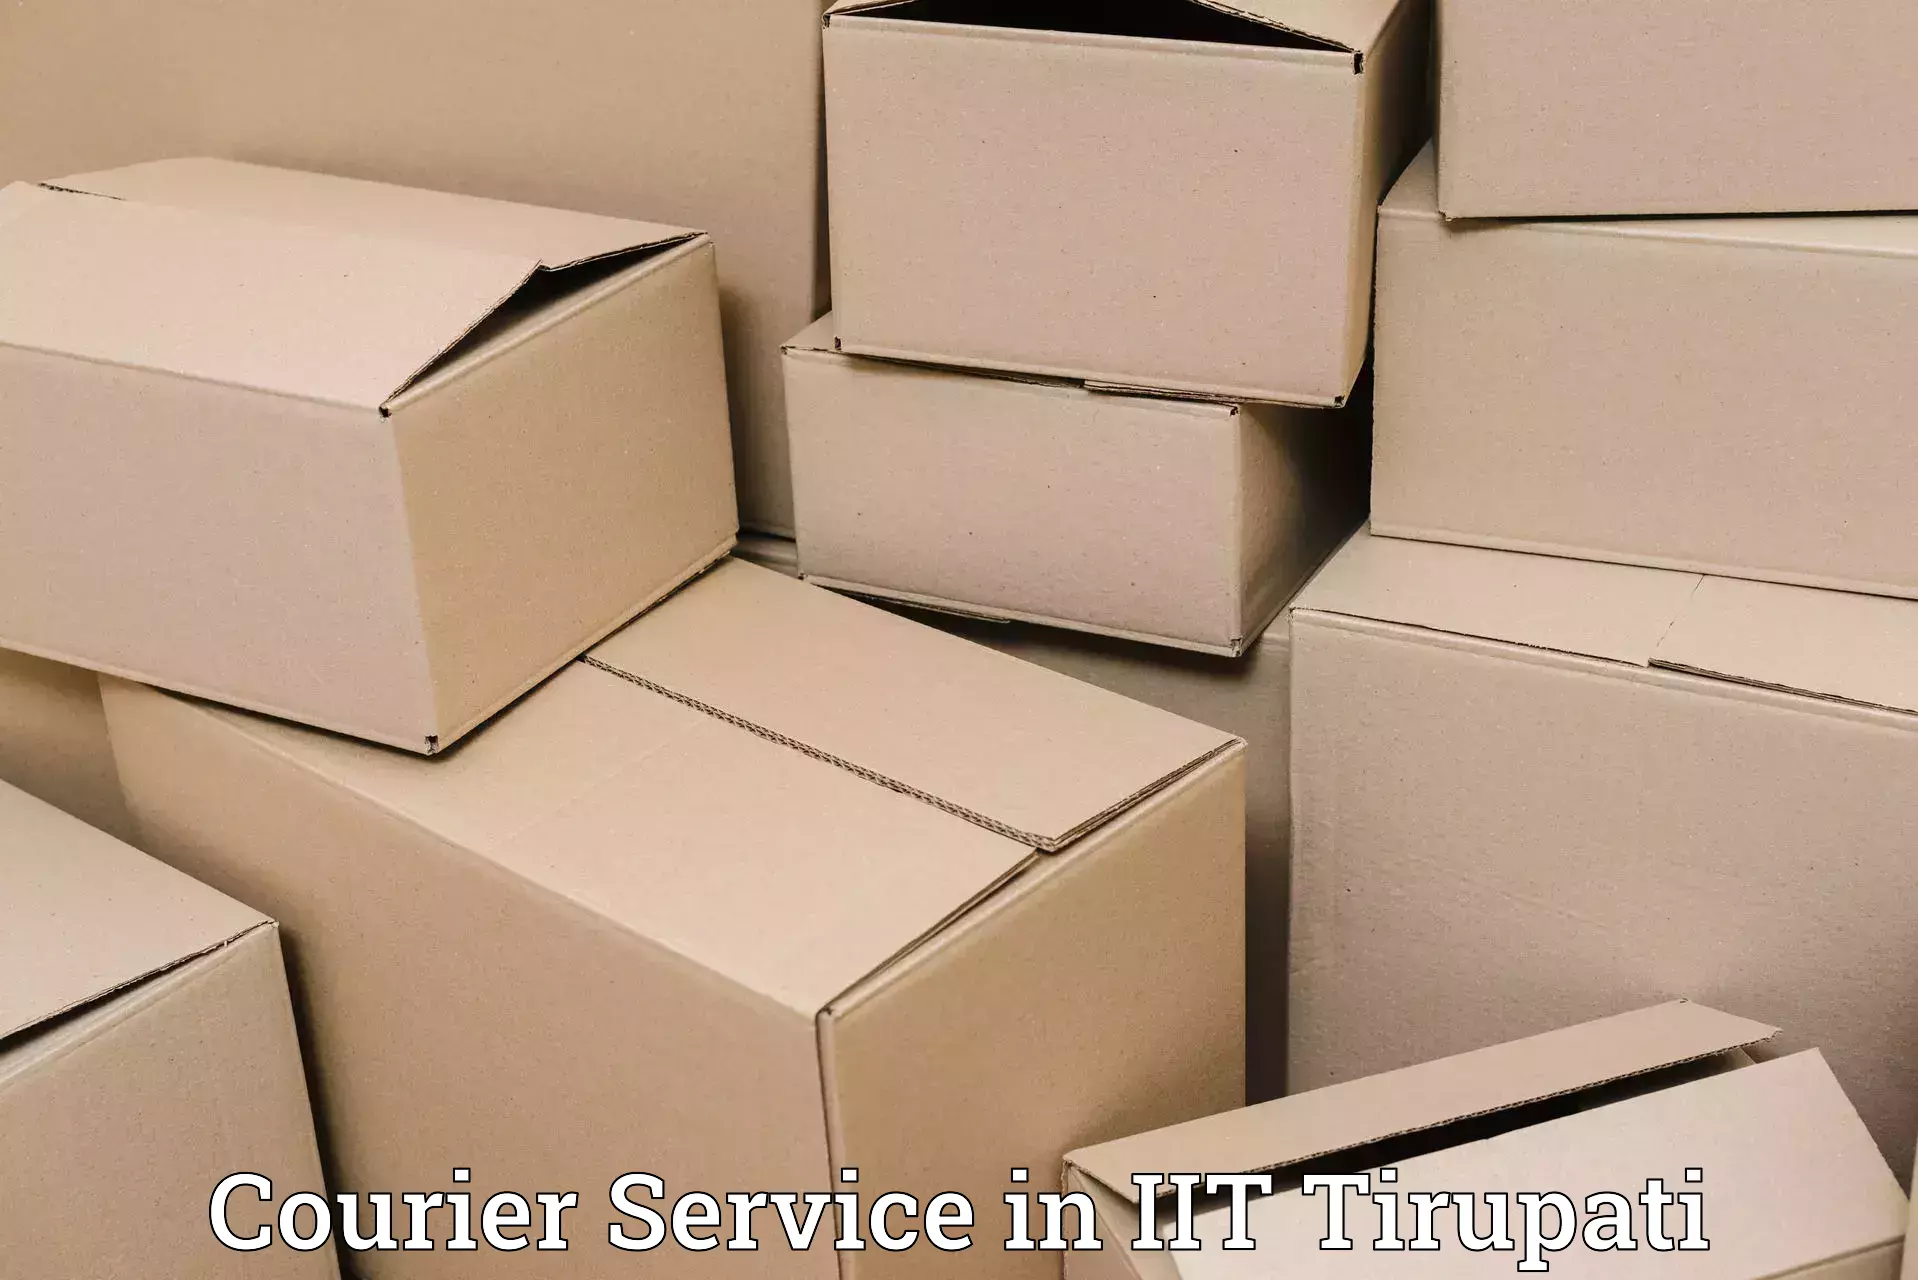 Postal and courier services in IIT Tirupati